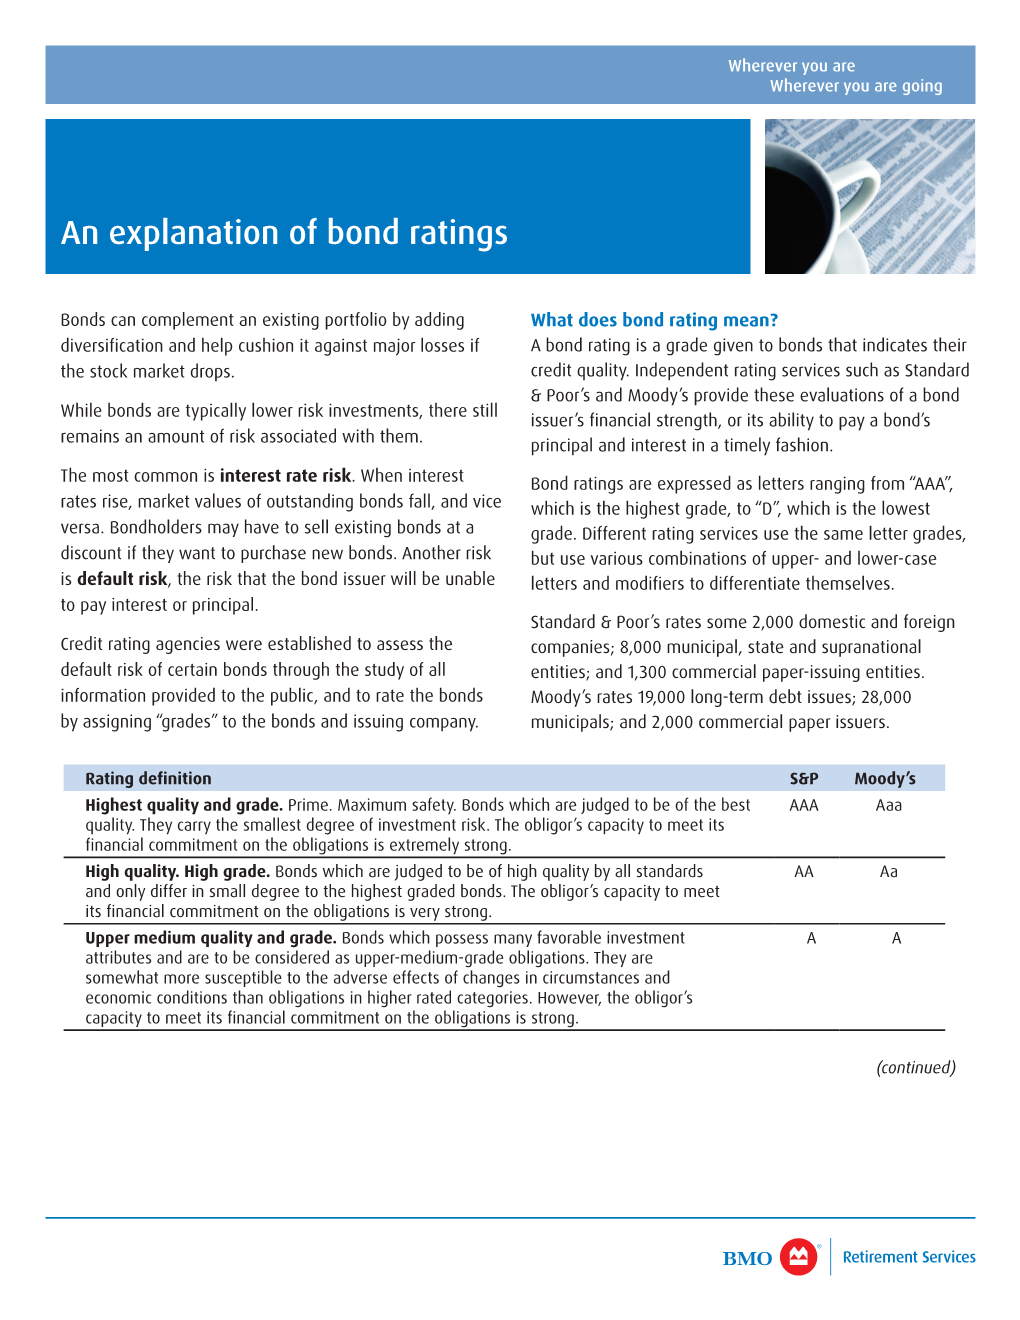 An Explanation of Bond Ratings